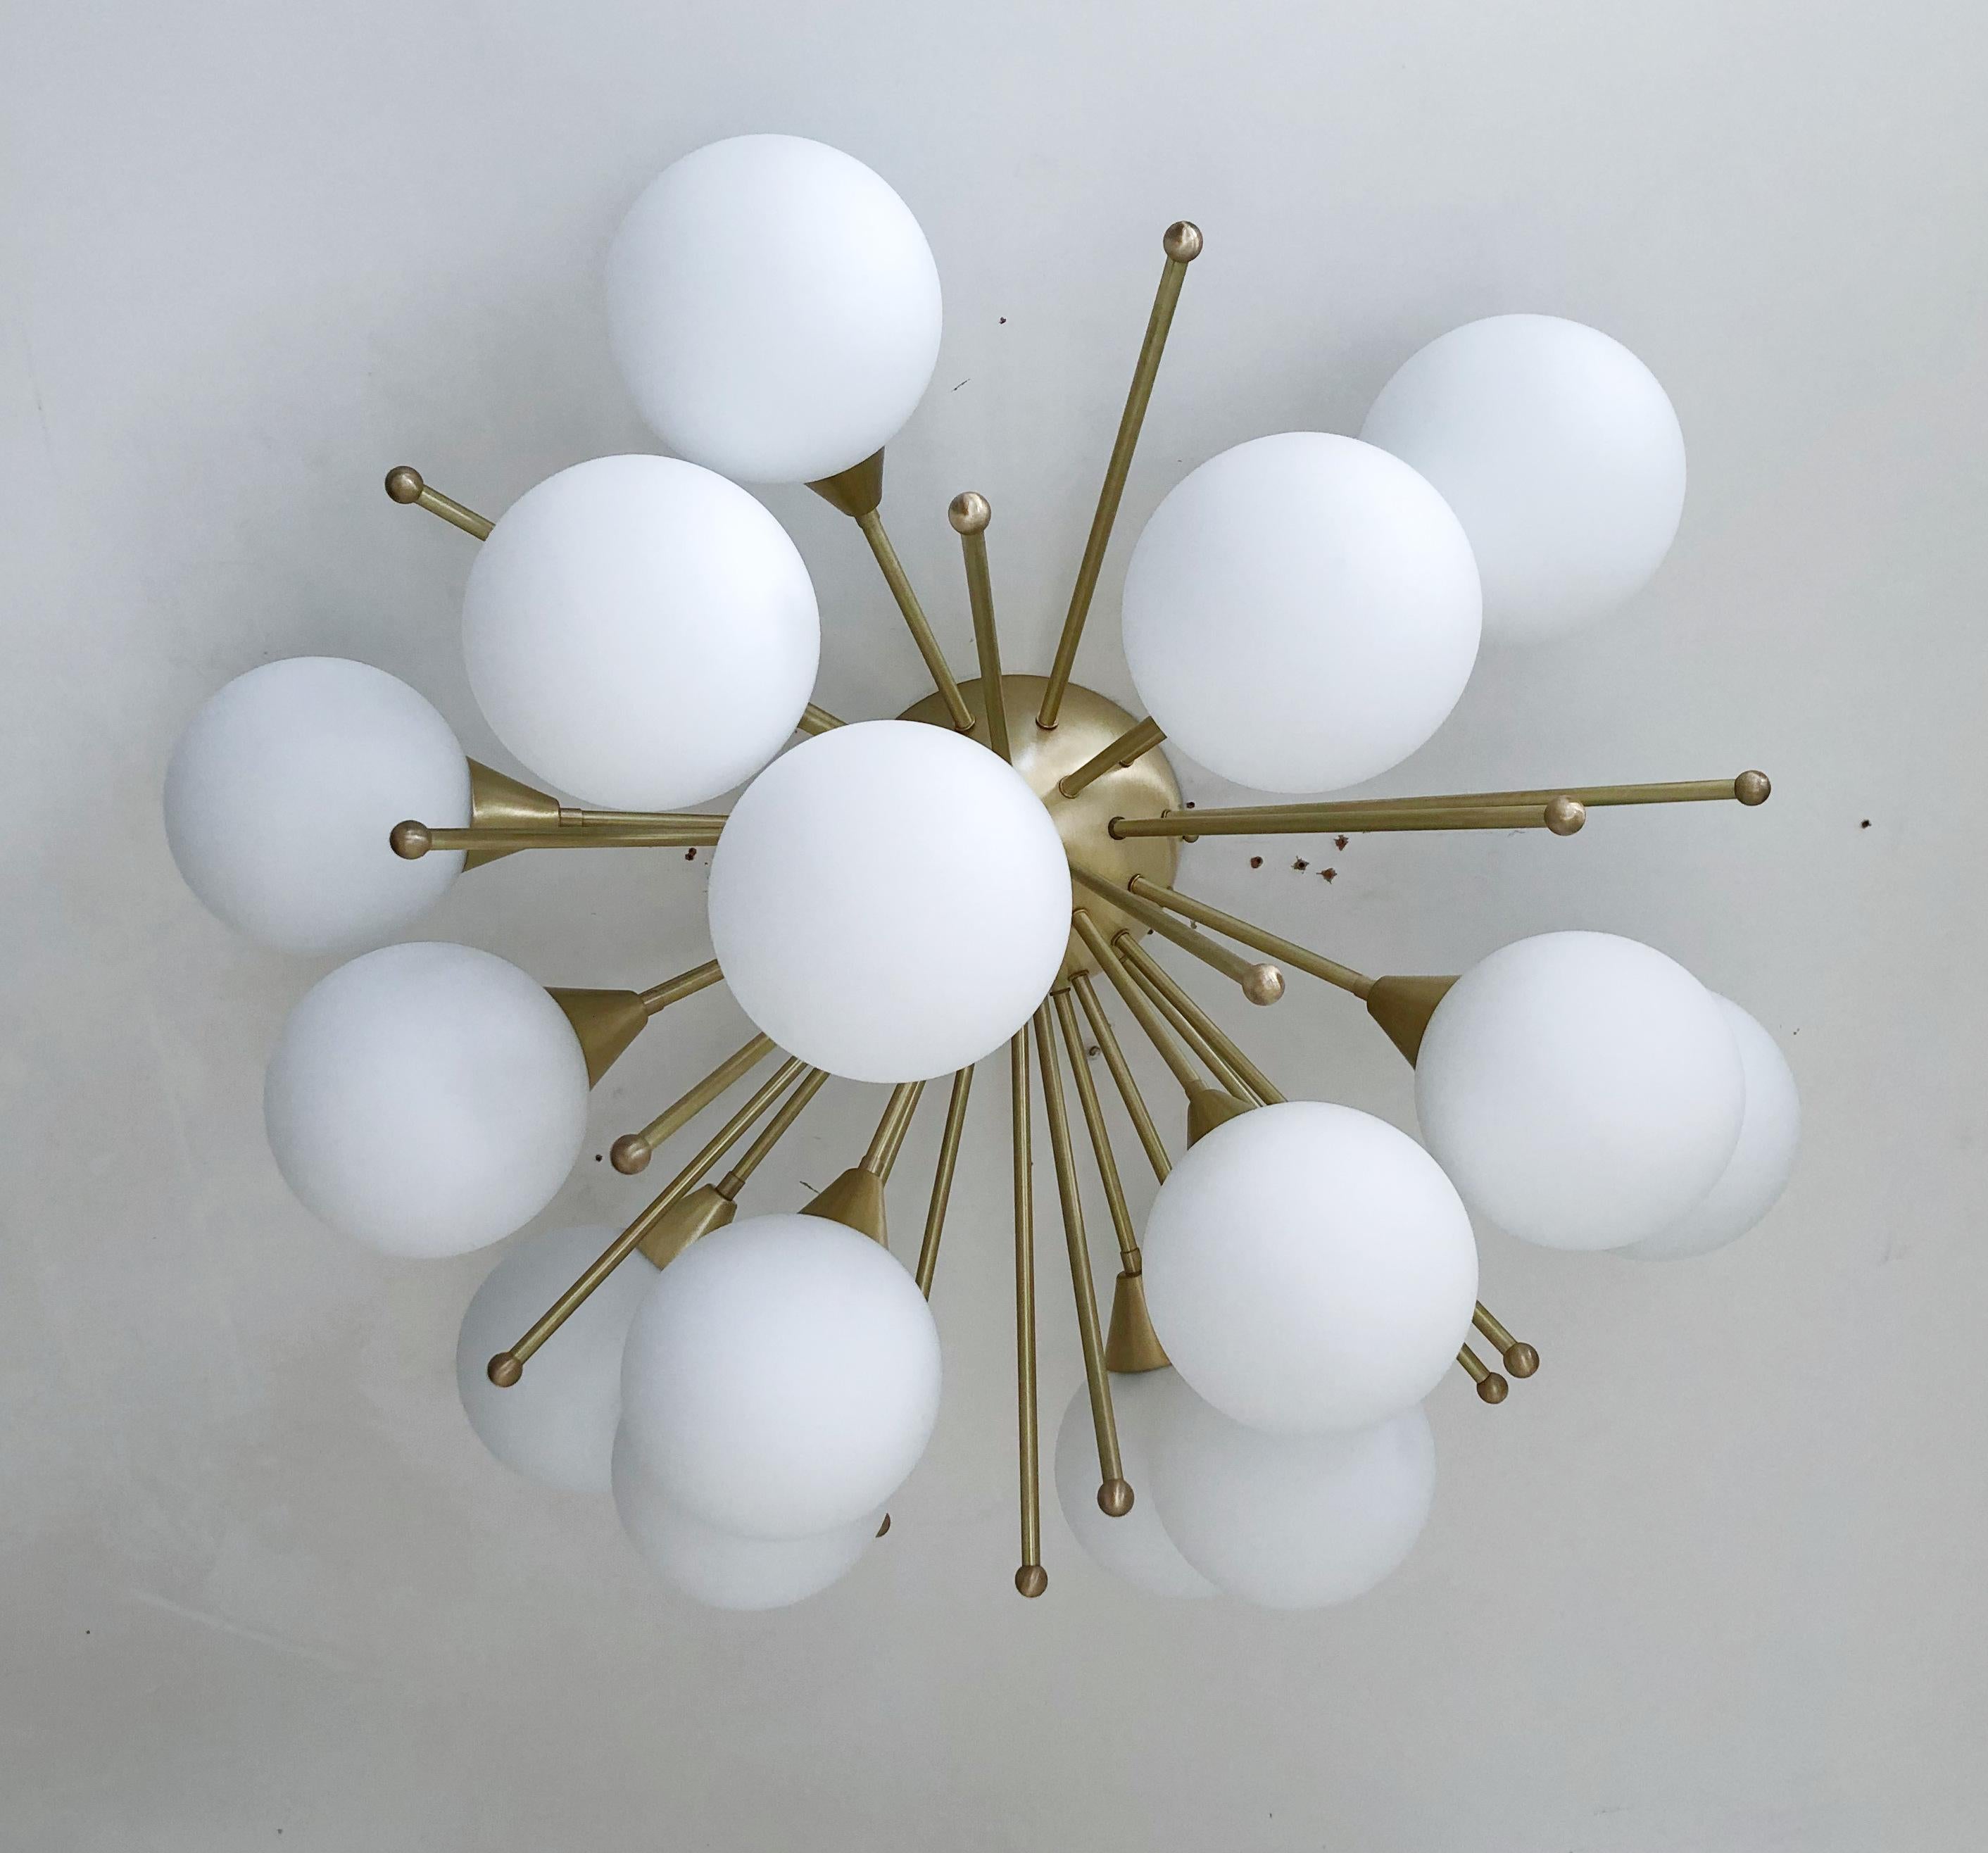 Italian Sputnik flush mount with Murano glass globes mounted on solid brass frame / Designed by Fabio Bergomi for Fabio Ltd / Made in Italy
15 lights / E12 or E14 type / max 40W each
Measures: Diameter 35.5 inches, height 18 inches
Order only / this